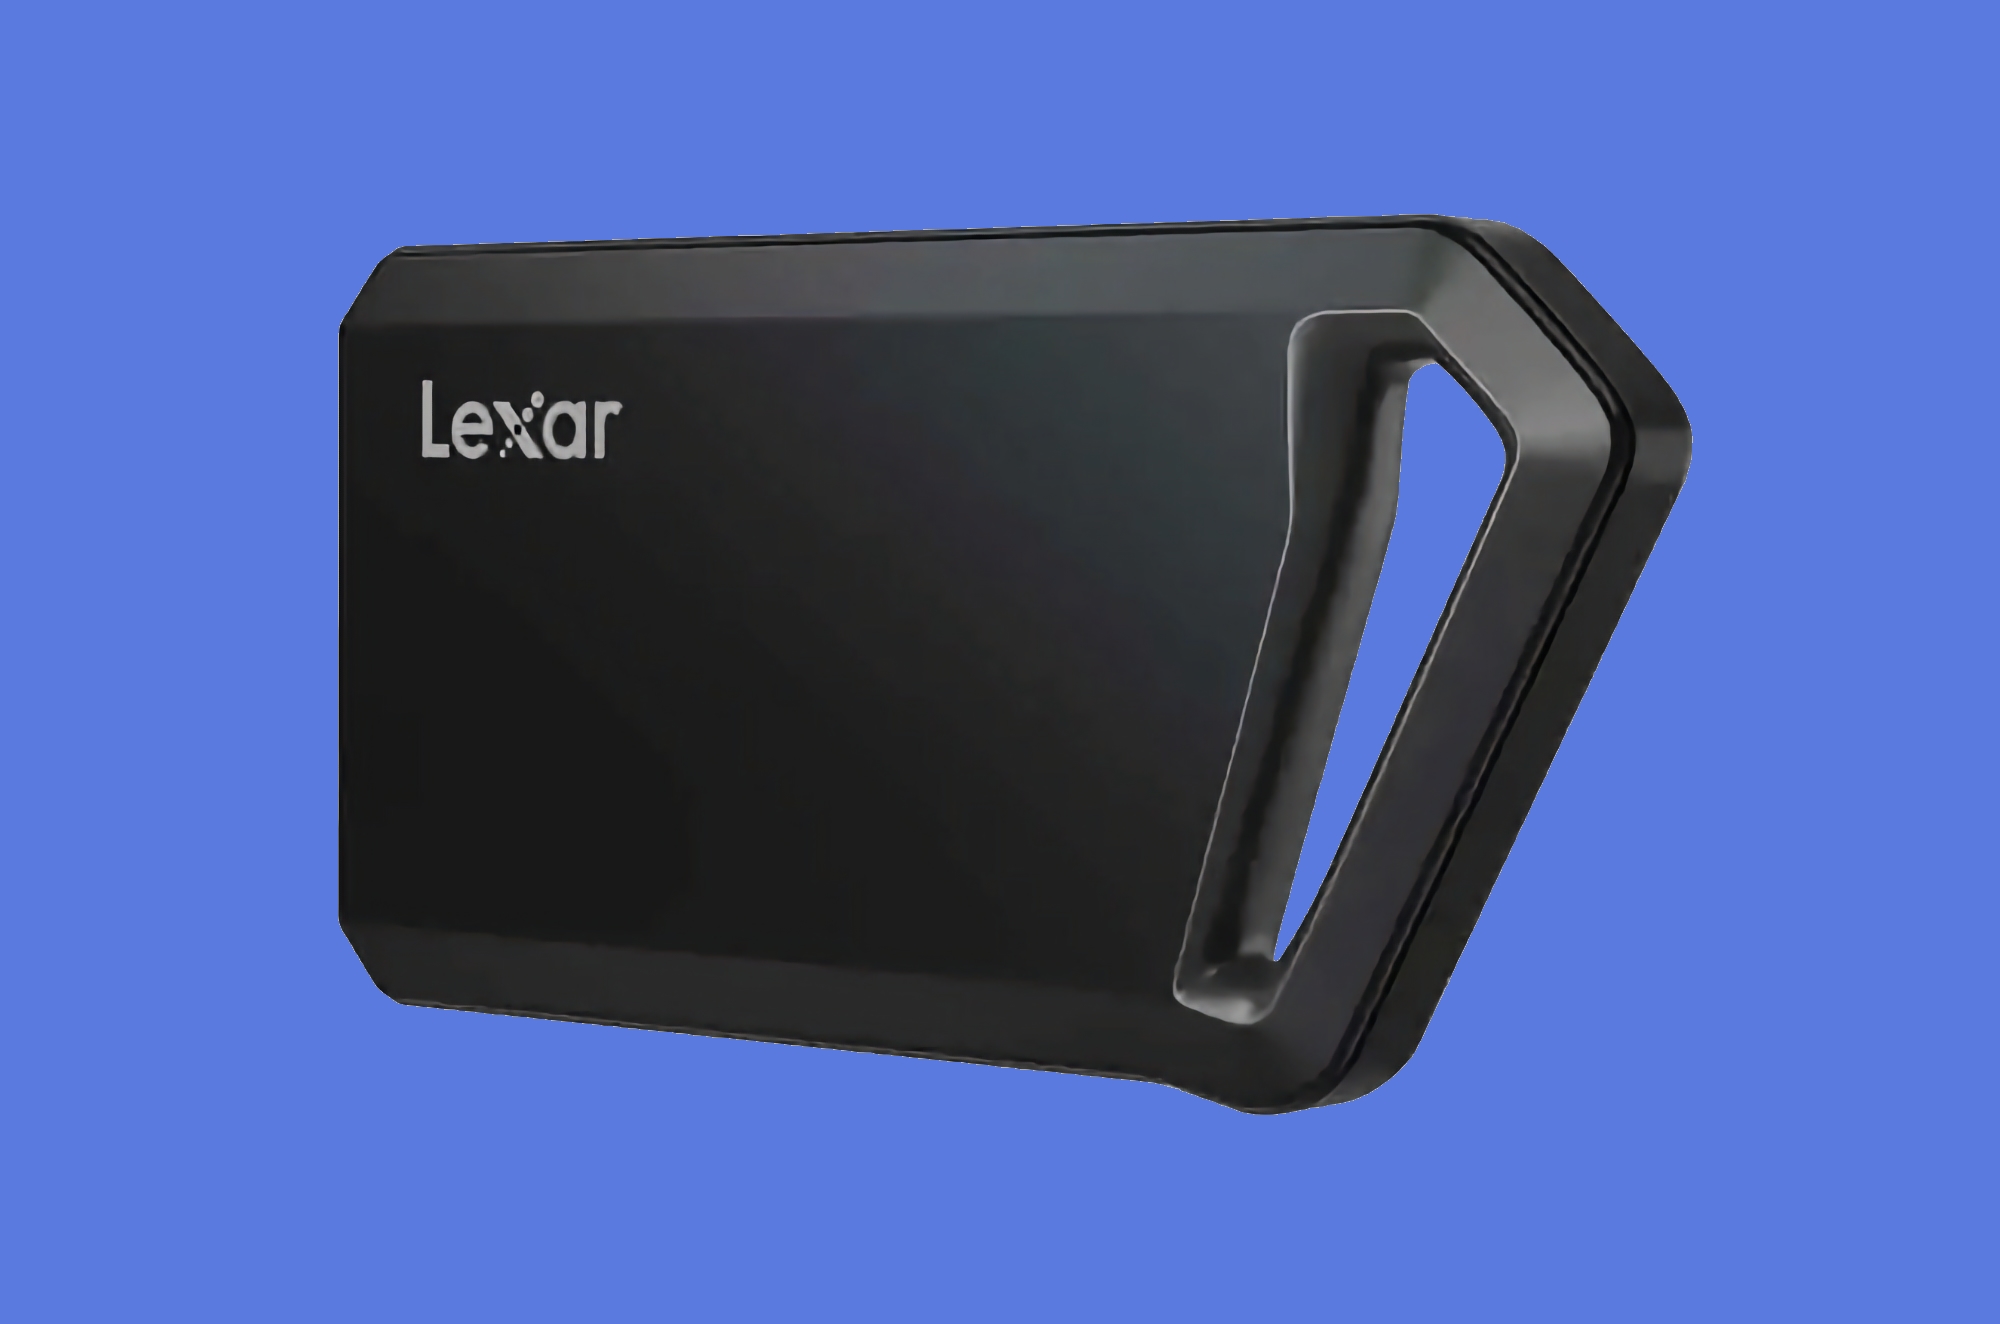 Lexar has introduced the Professional SL600 Portable SSD with shockproof case, 1-4TB capacity and prices starting from $89